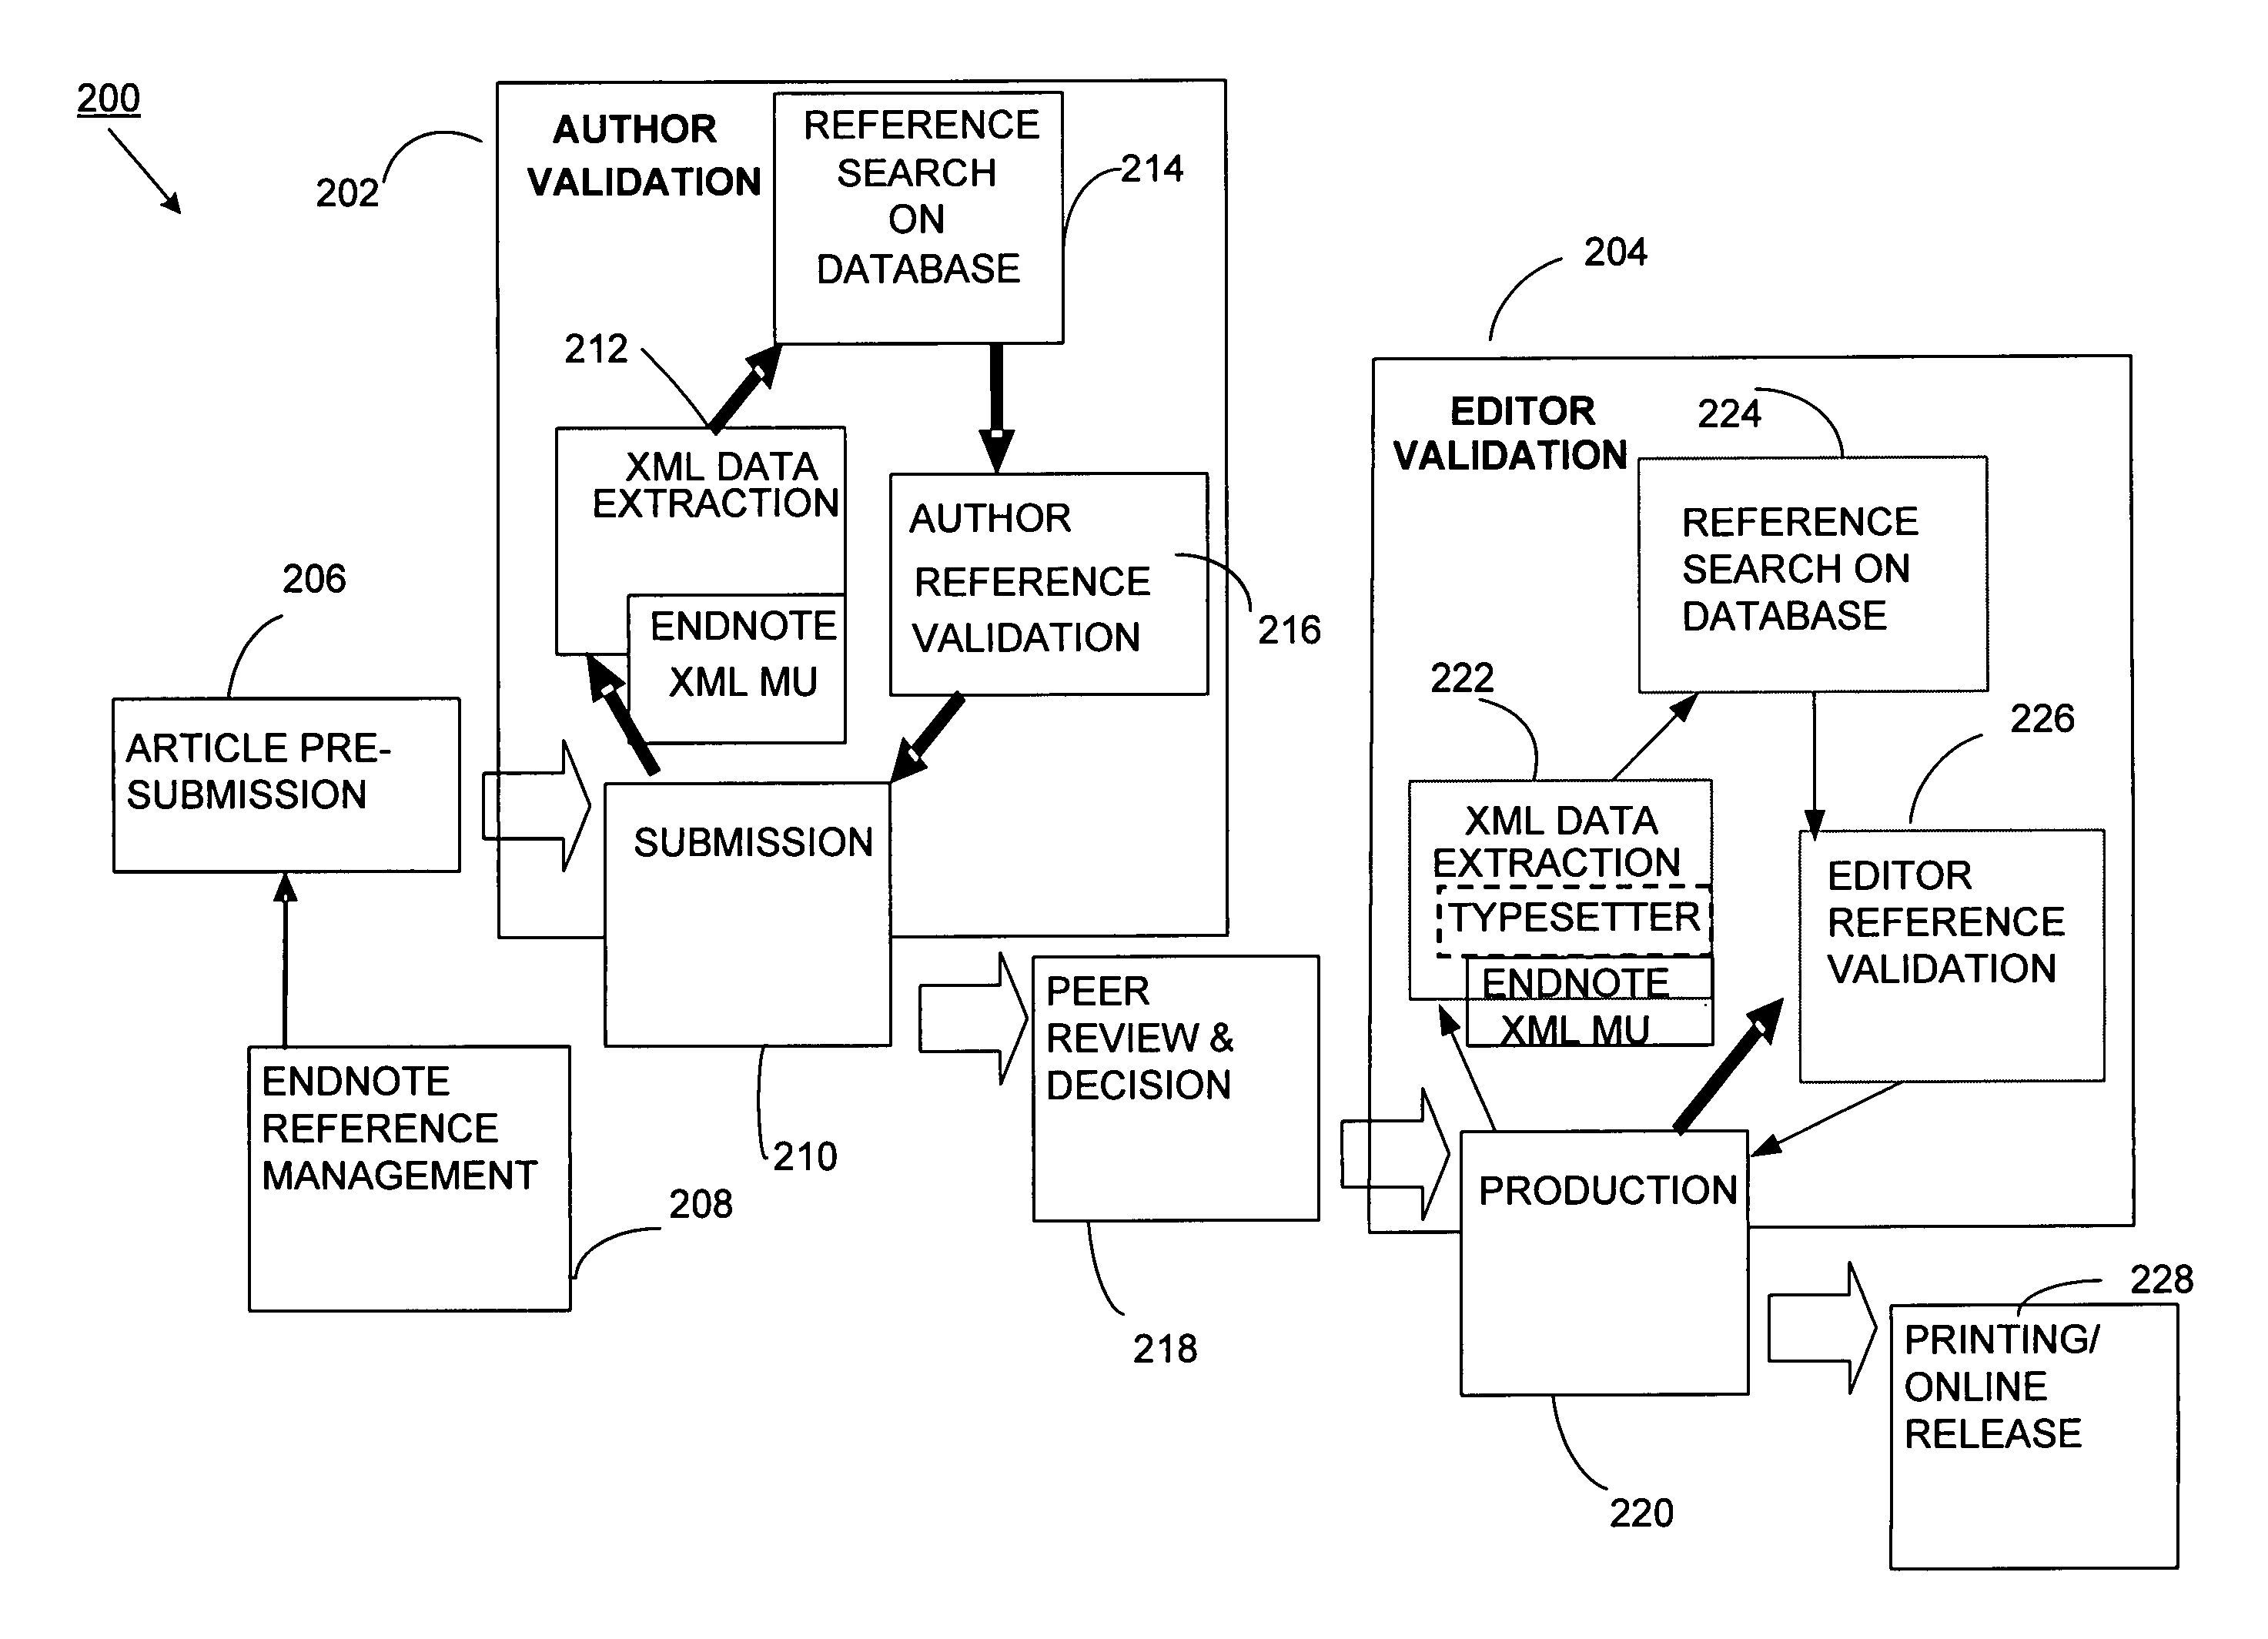 Method and system for validating references